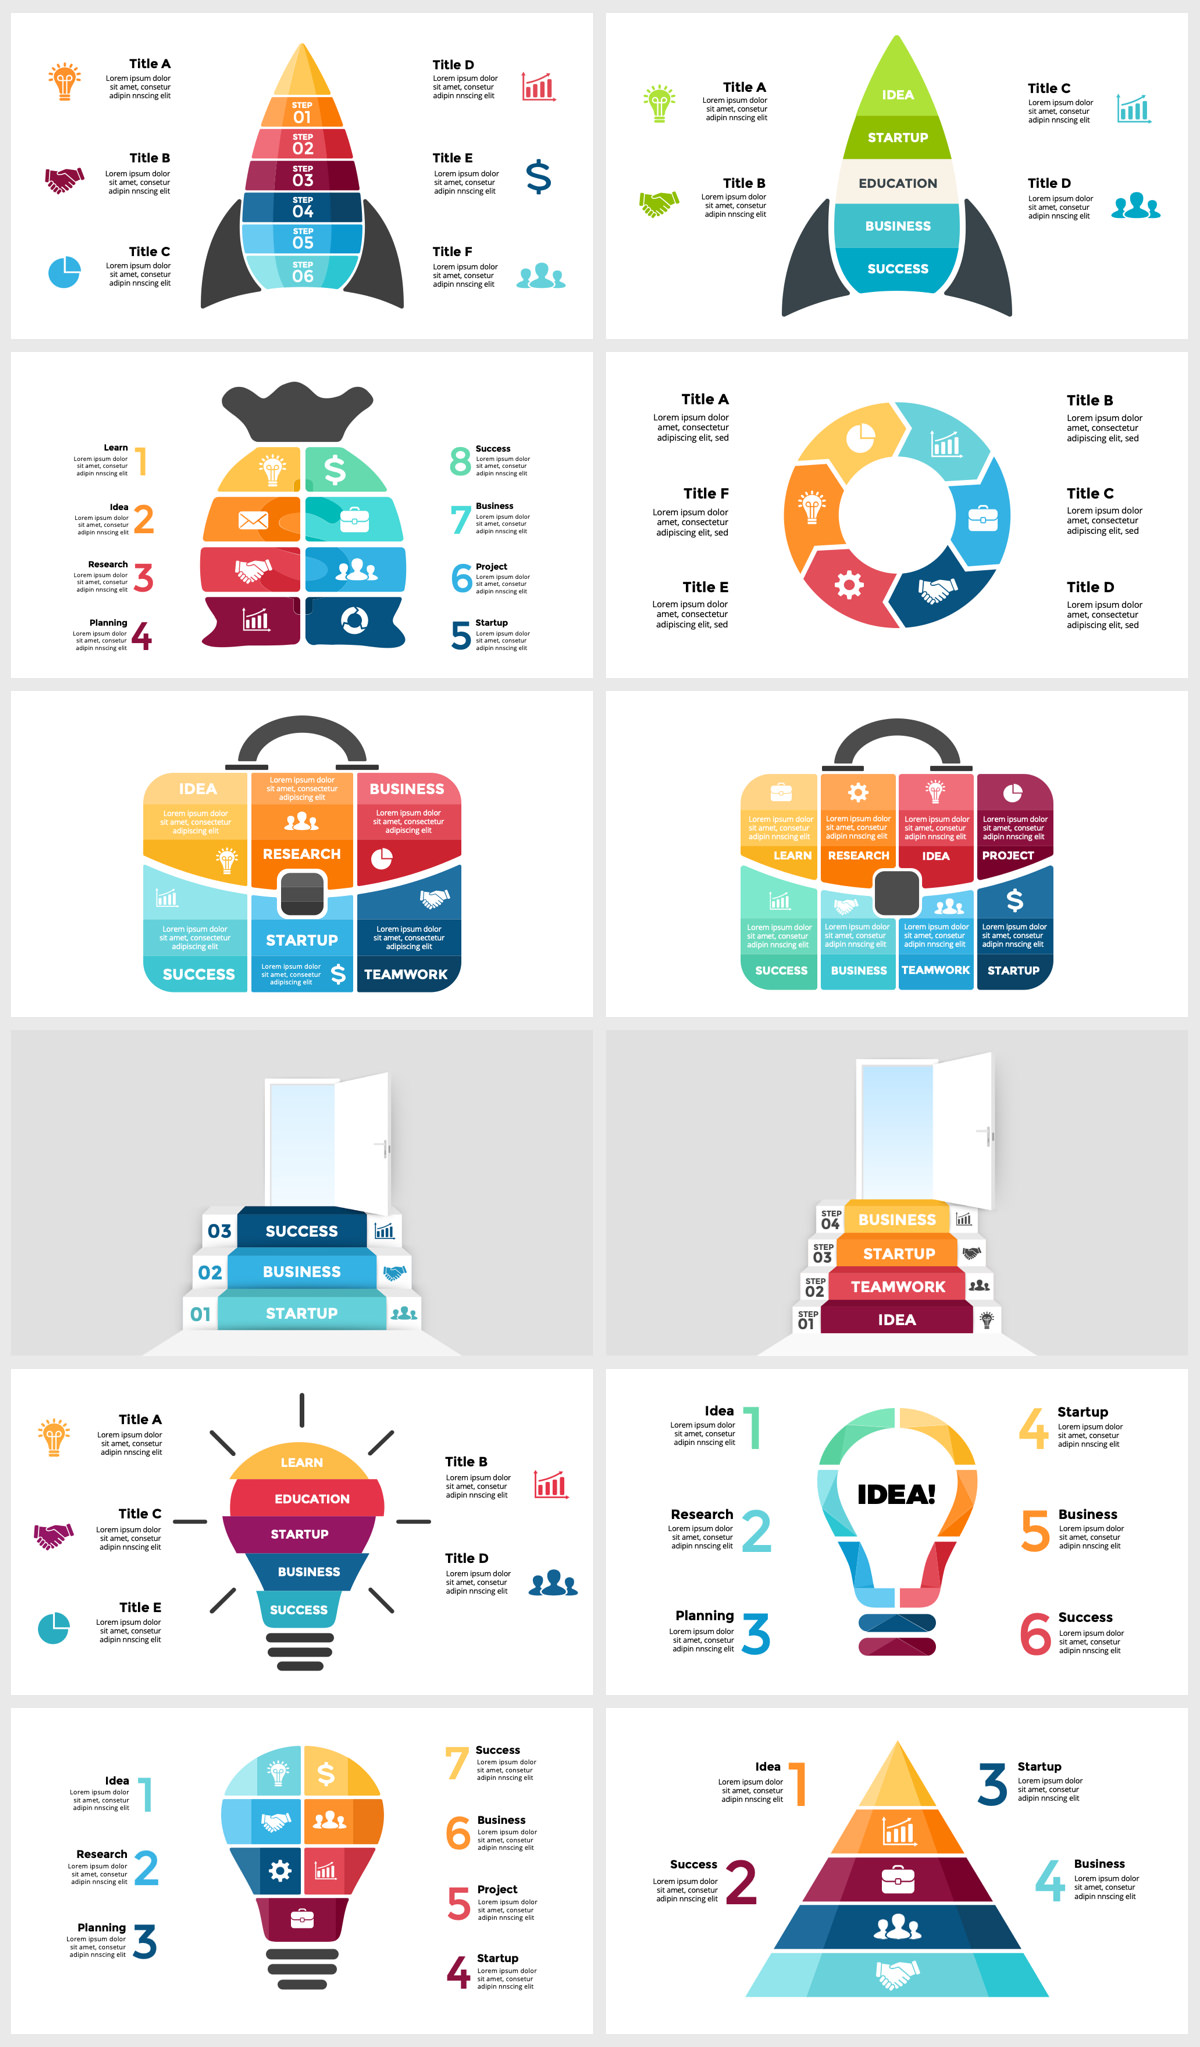 Wowly - 3500 Infographics & Presentation Templates! Updated! PowerPoint Canva Figma Sketch Ai Psd. - 191